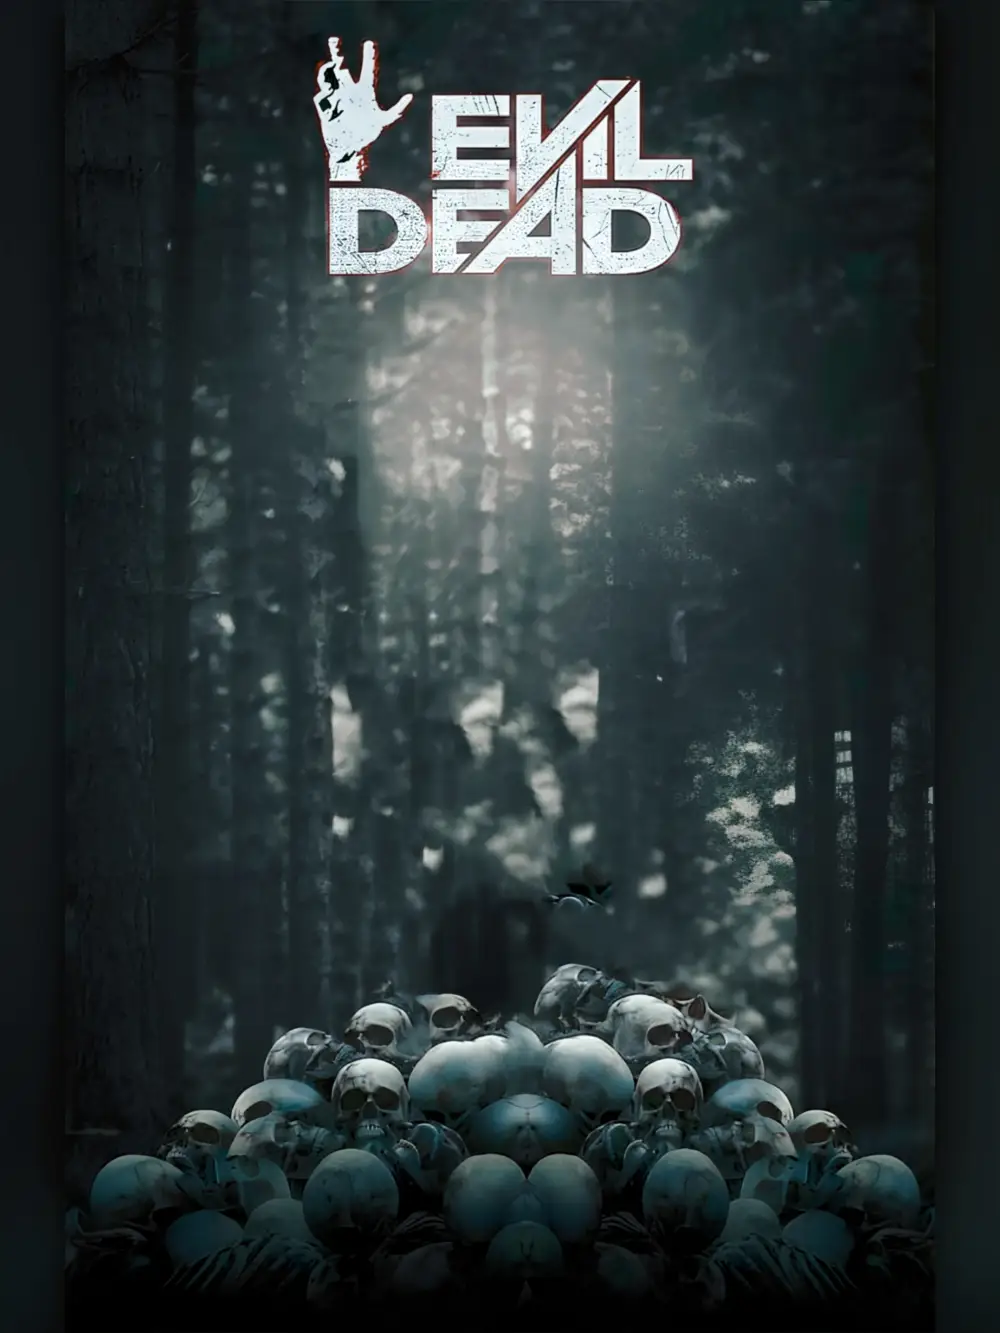 You are currently viewing Evil Dead picsart cb background hd